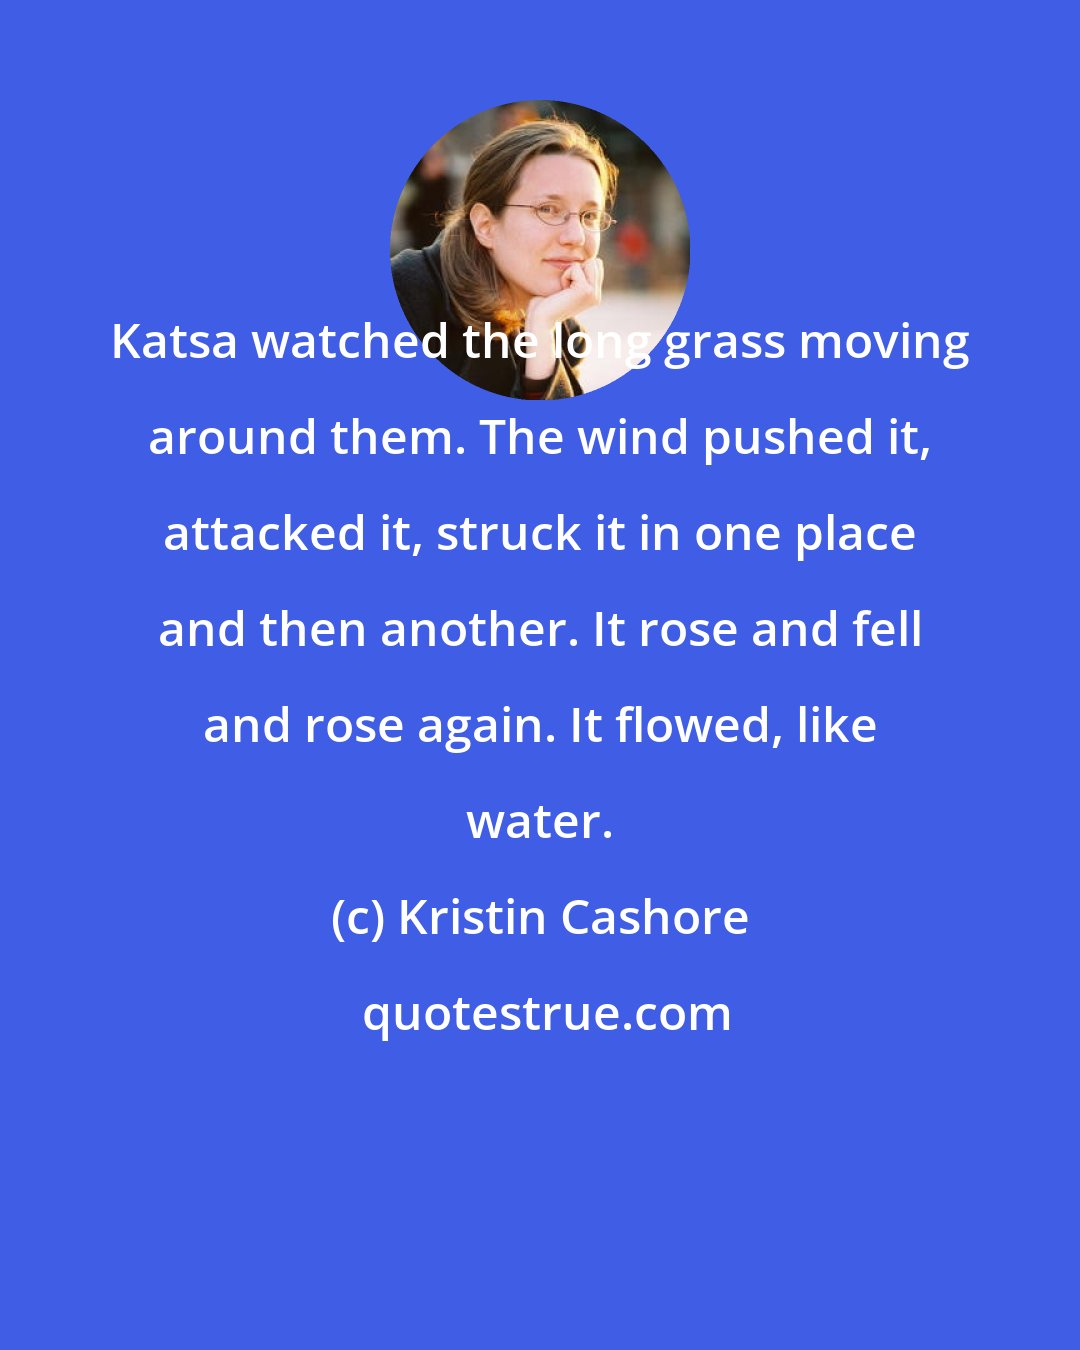 Kristin Cashore: Katsa watched the long grass moving around them. The wind pushed it, attacked it, struck it in one place and then another. It rose and fell and rose again. It flowed, like water.